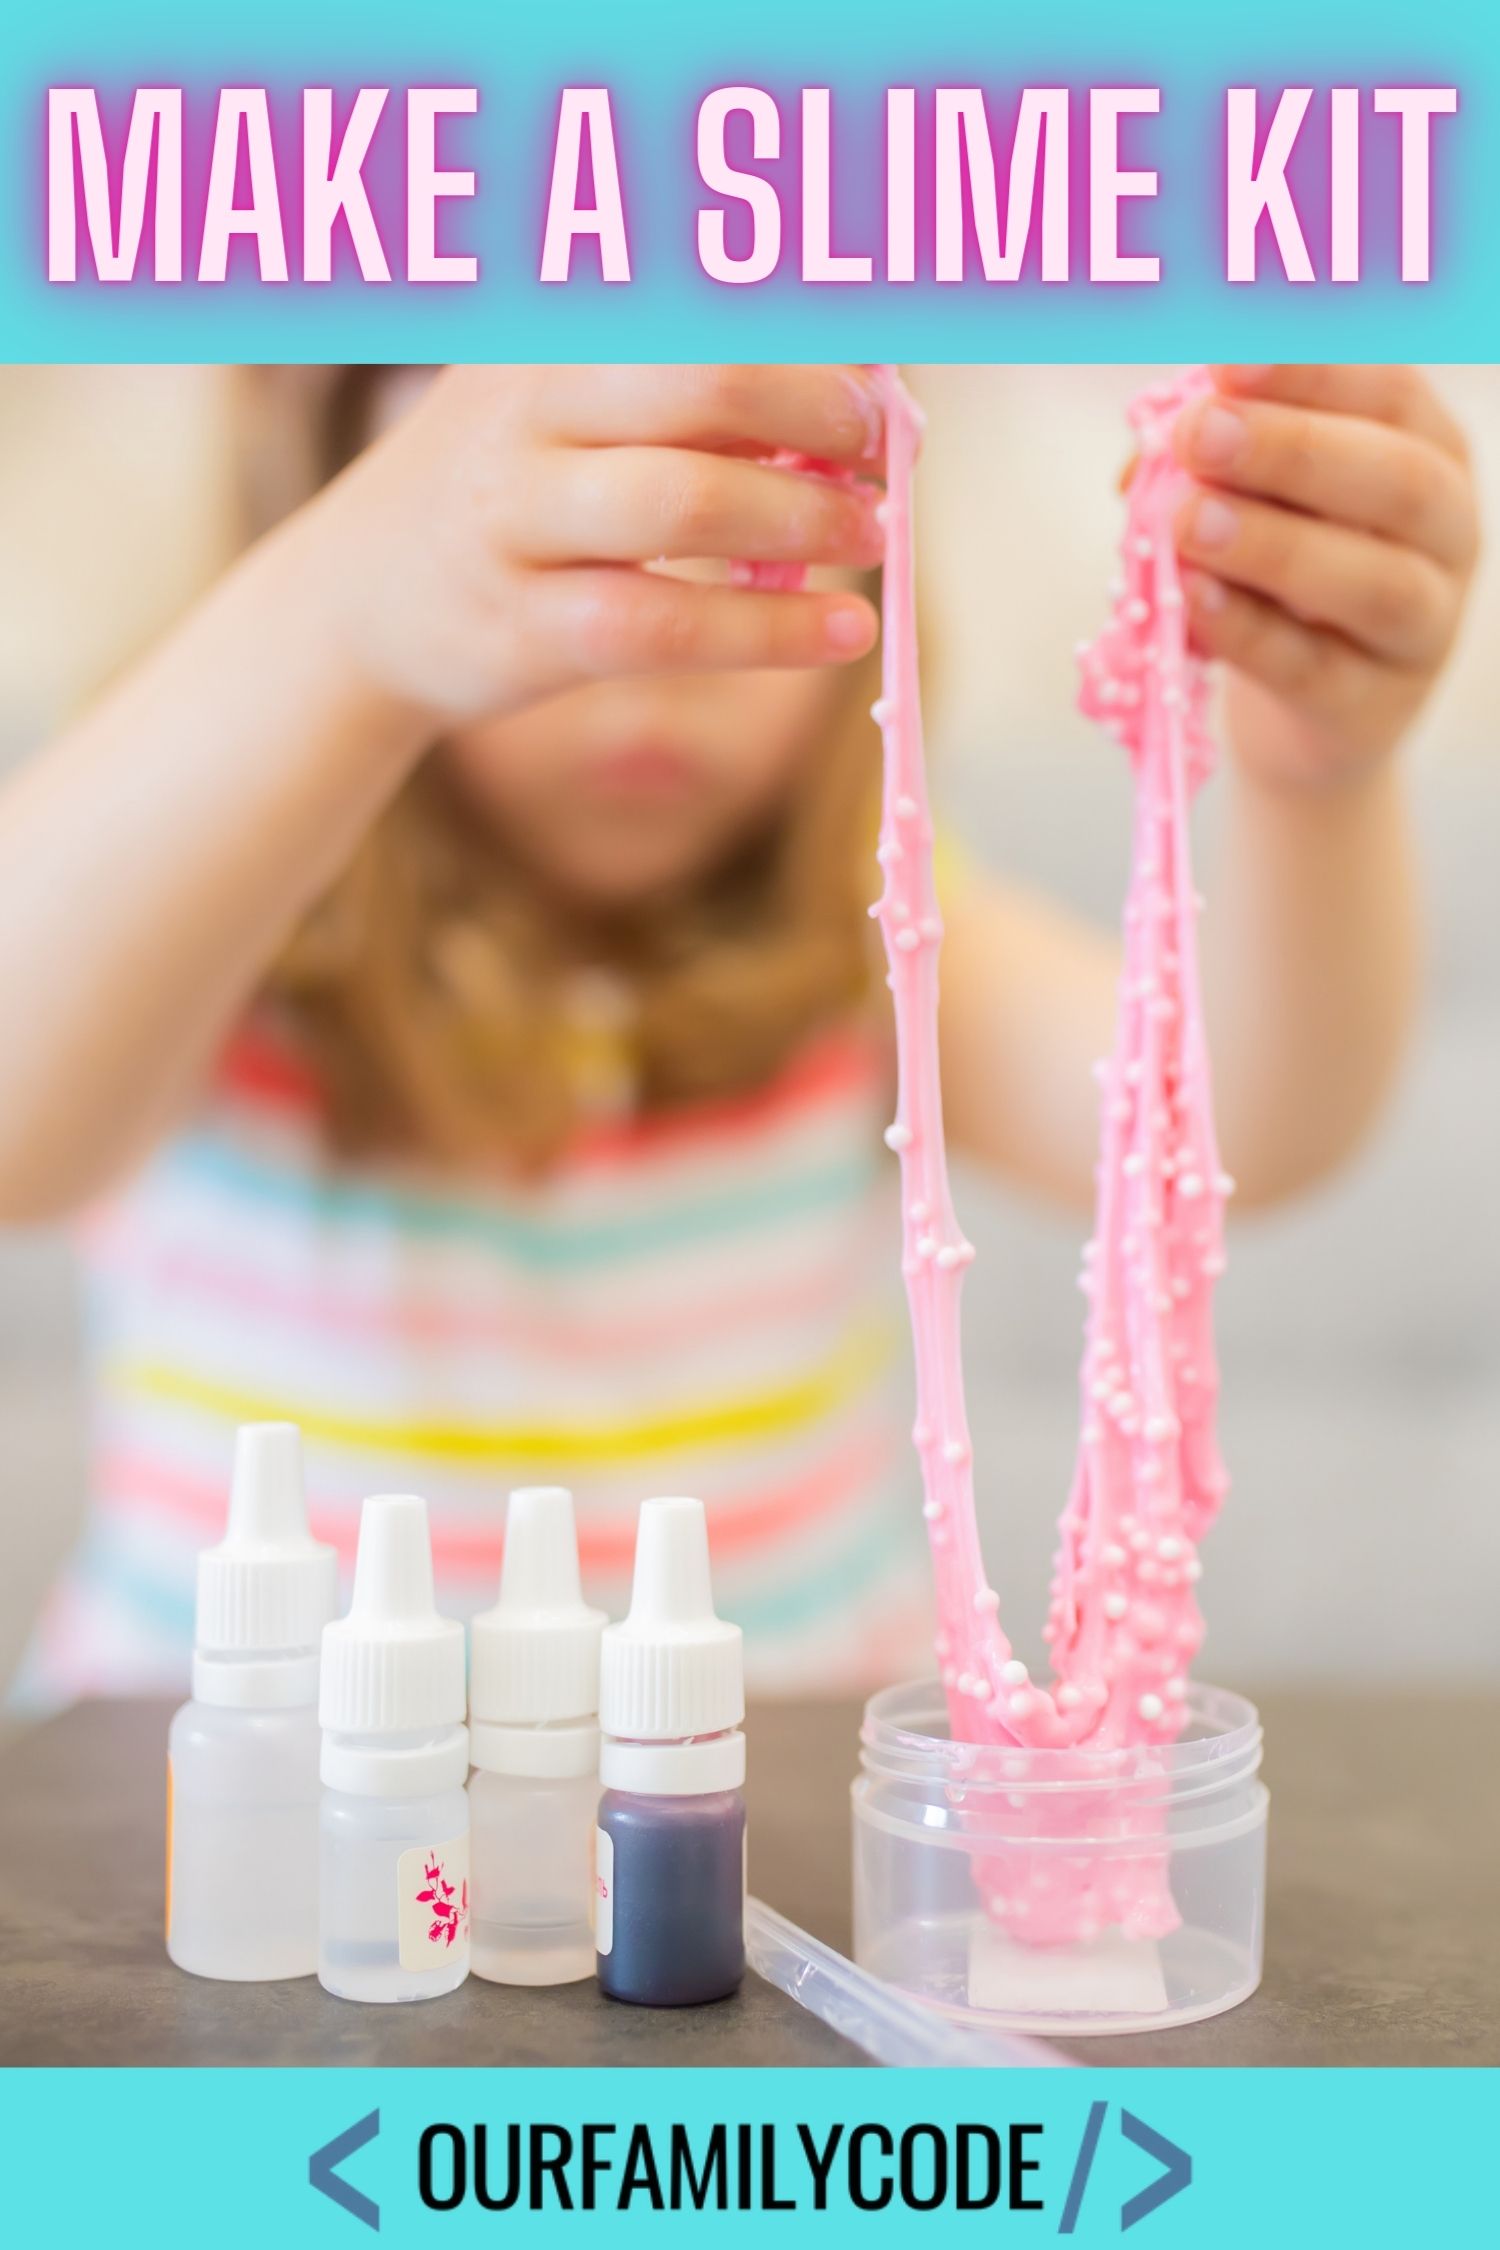 A picture of a kids playing with pink slime with white foam beads in it with a title that says "make a slime kit" in pink.